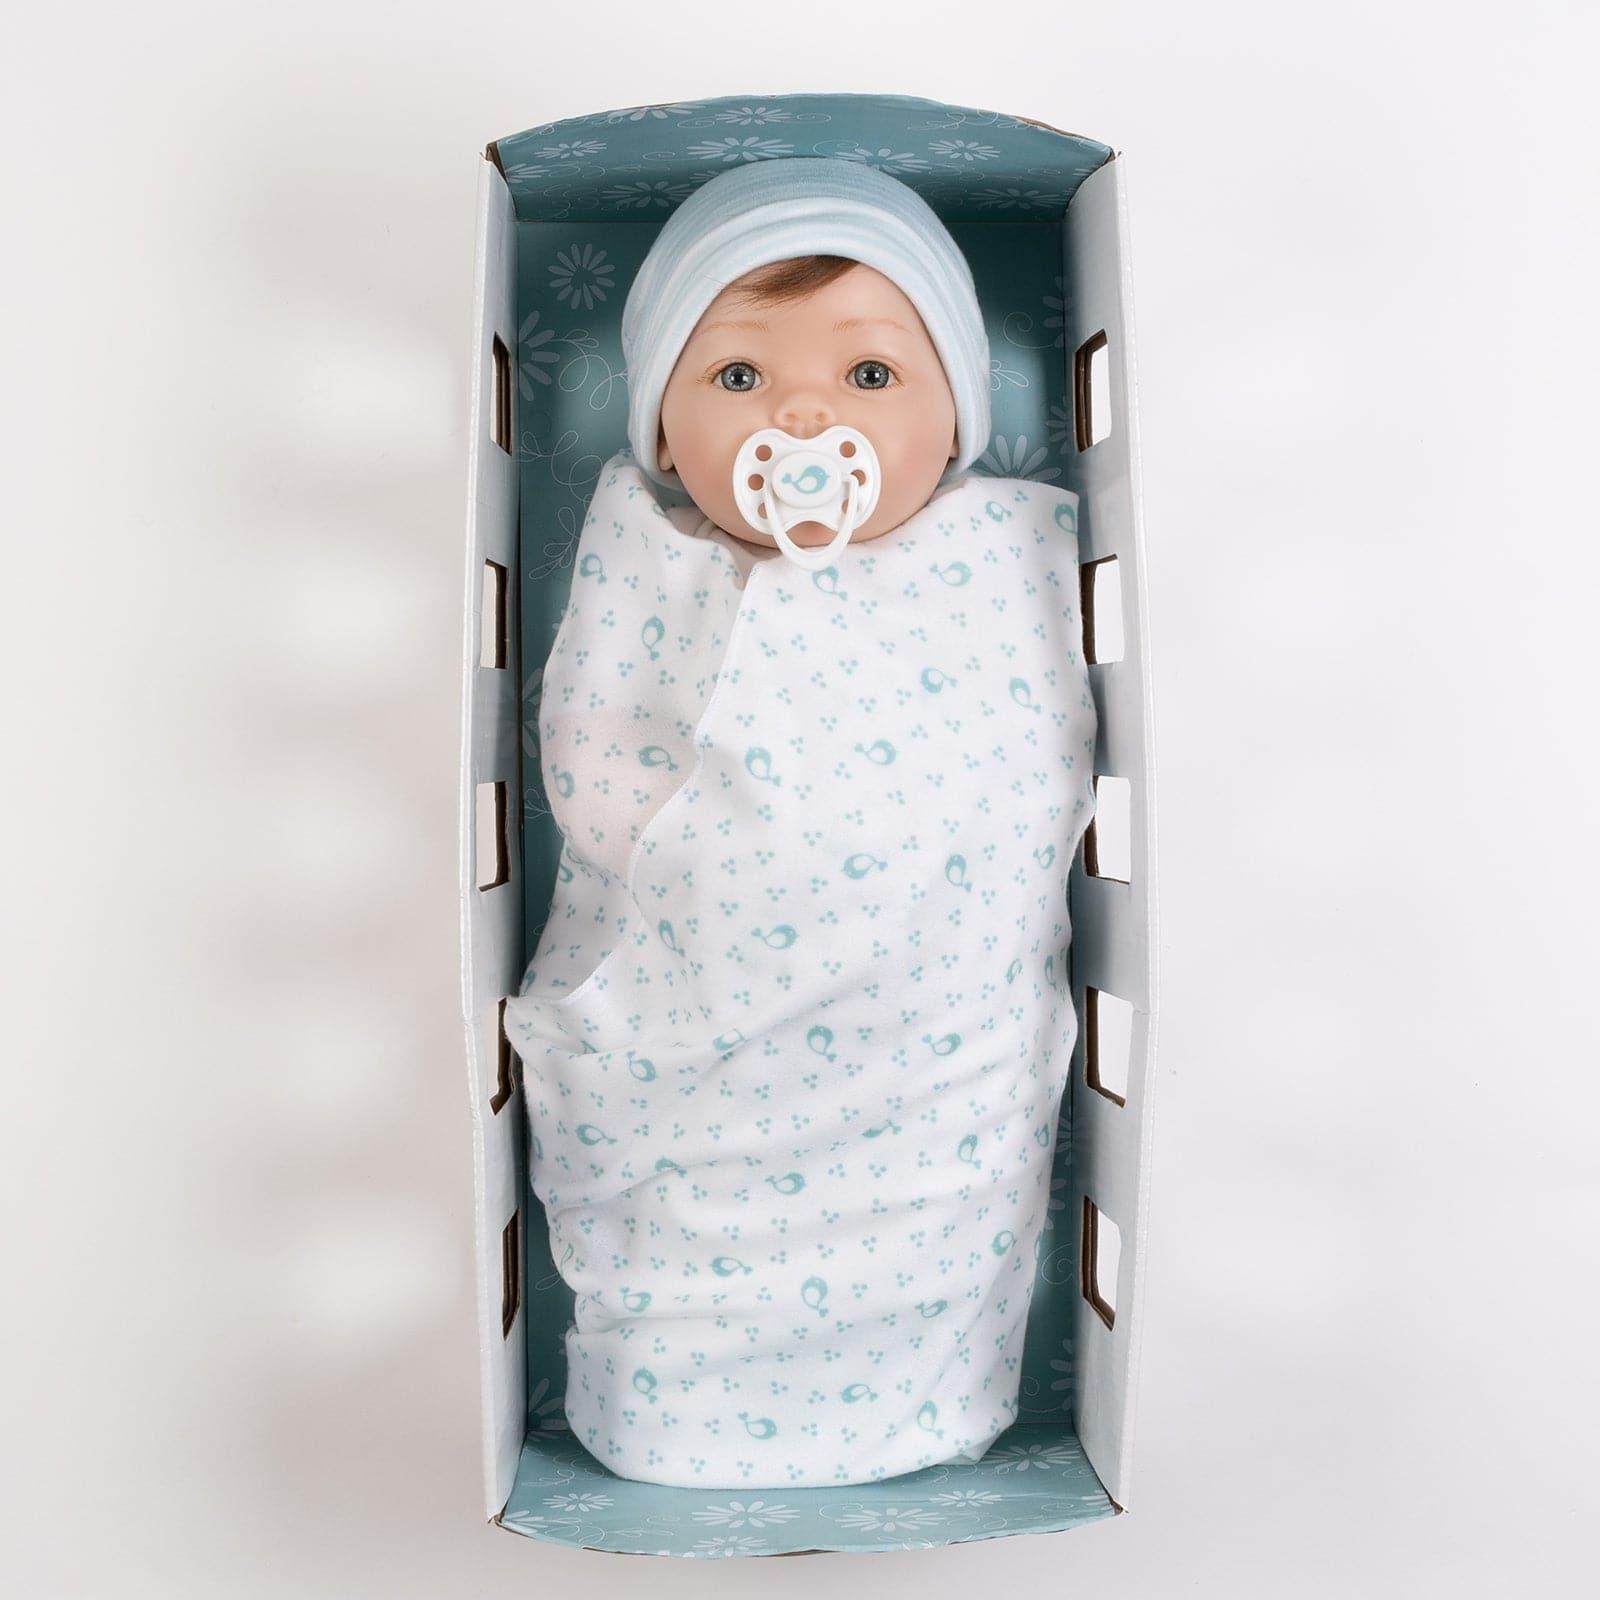 Paradise Galleries Newborn Baby Boy Doll - Forever Yours Believe, 3+